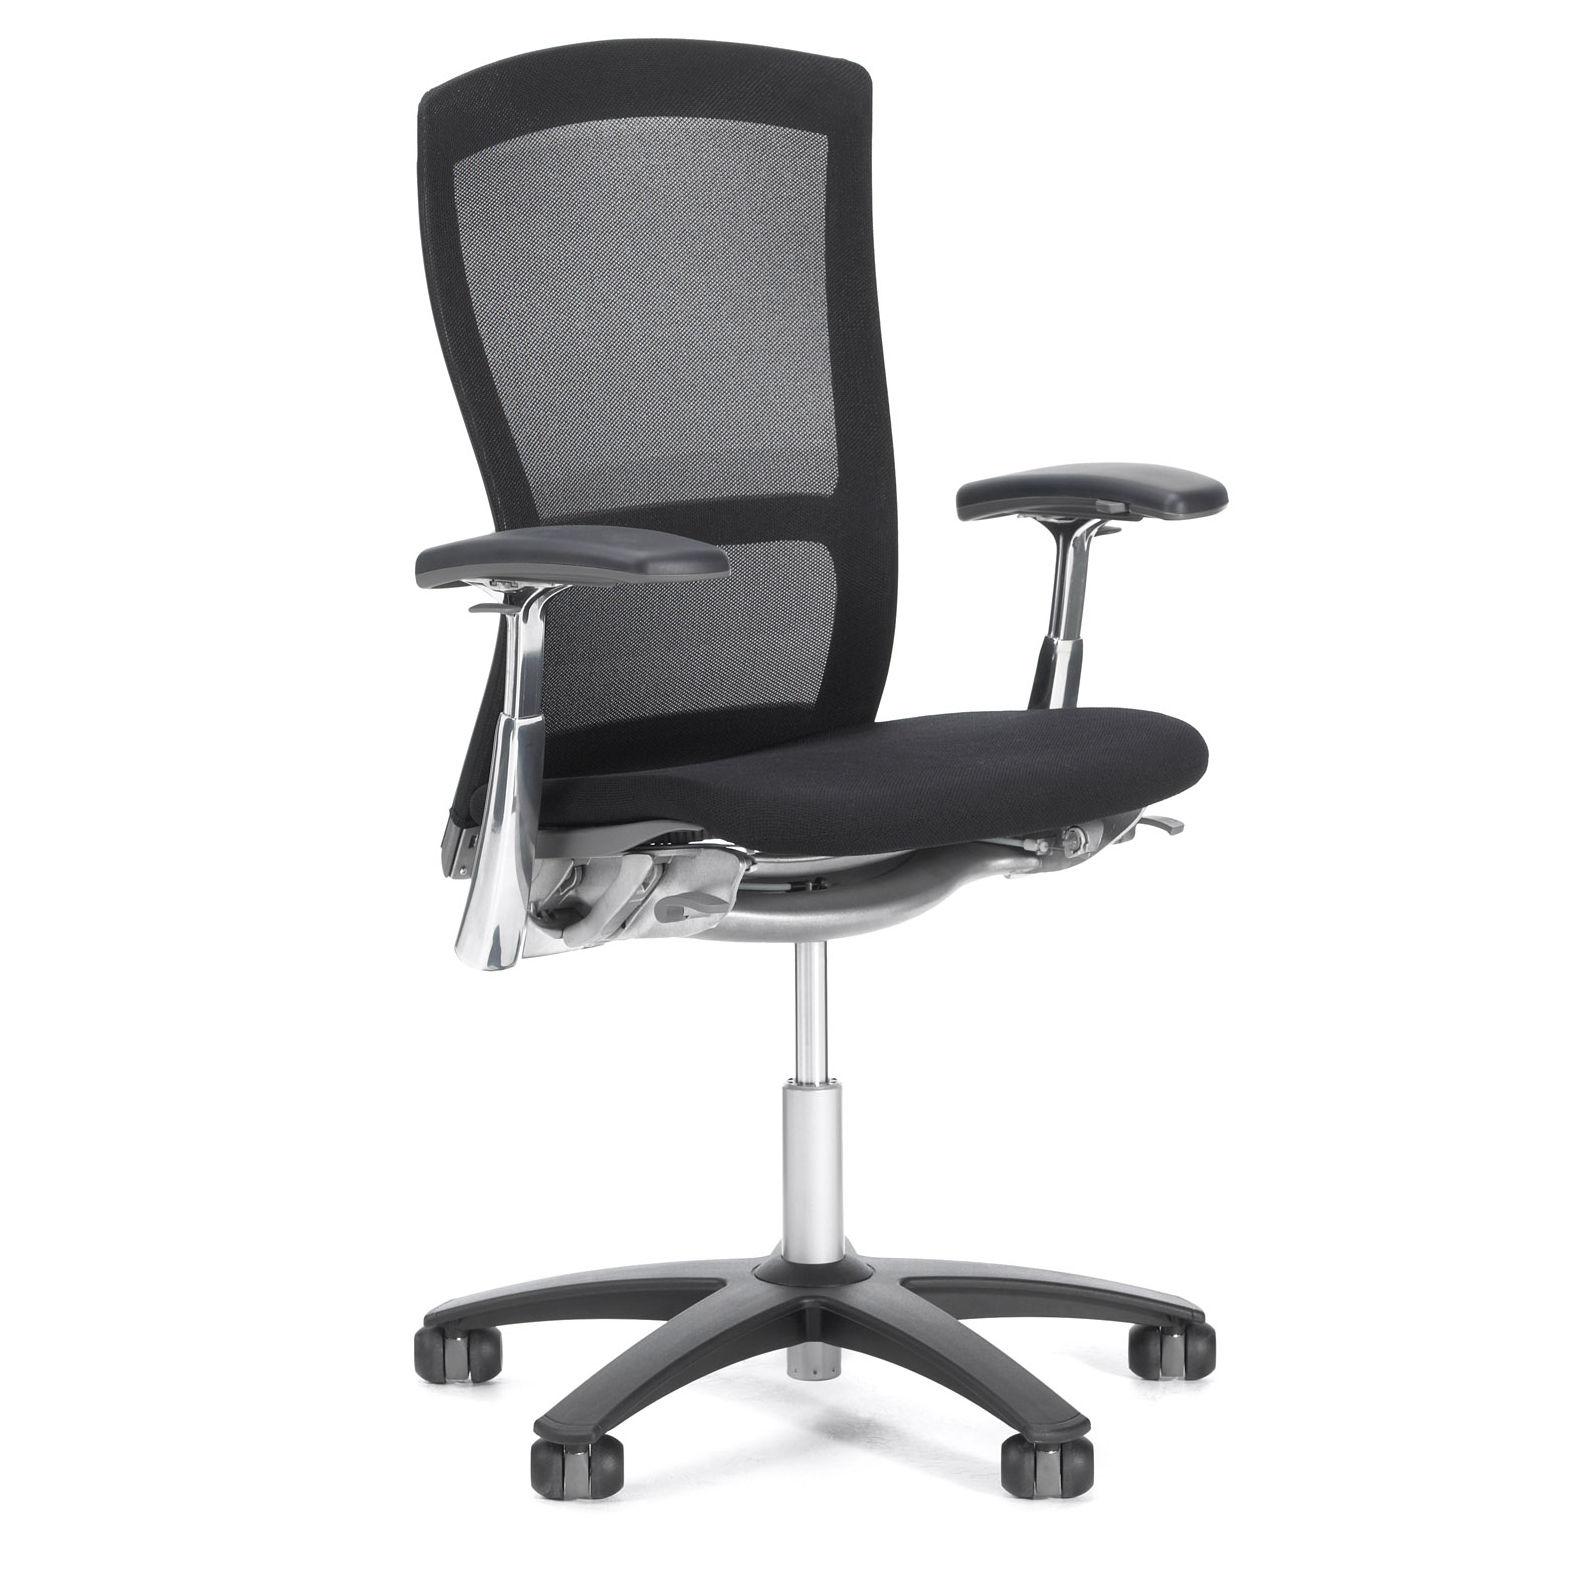 3 Office Chairs Even Cooler Than The Herman Miller Aeron_1